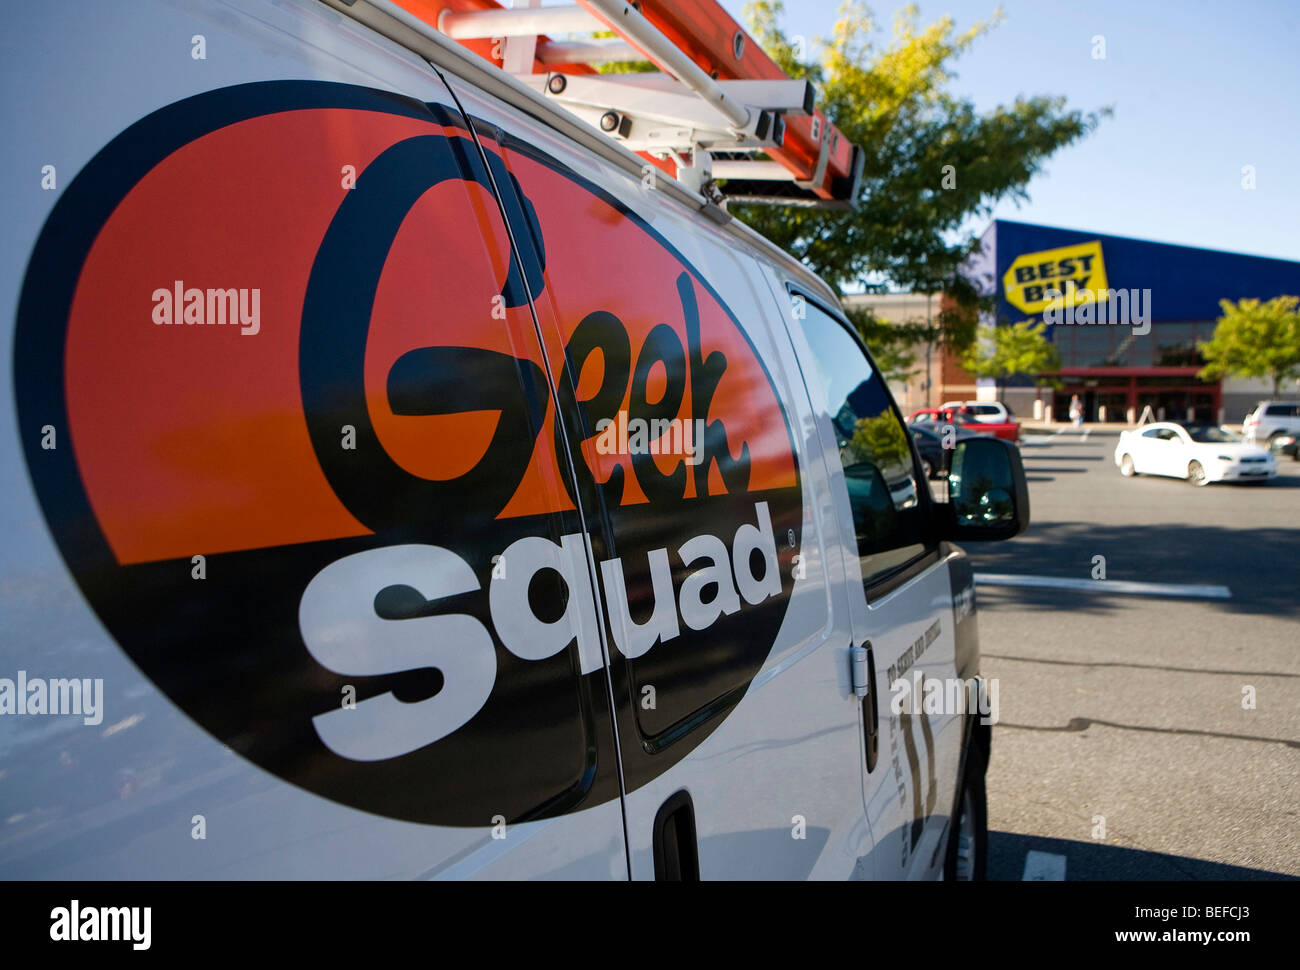 A Best Buy retail location in Maryland Stock Photo